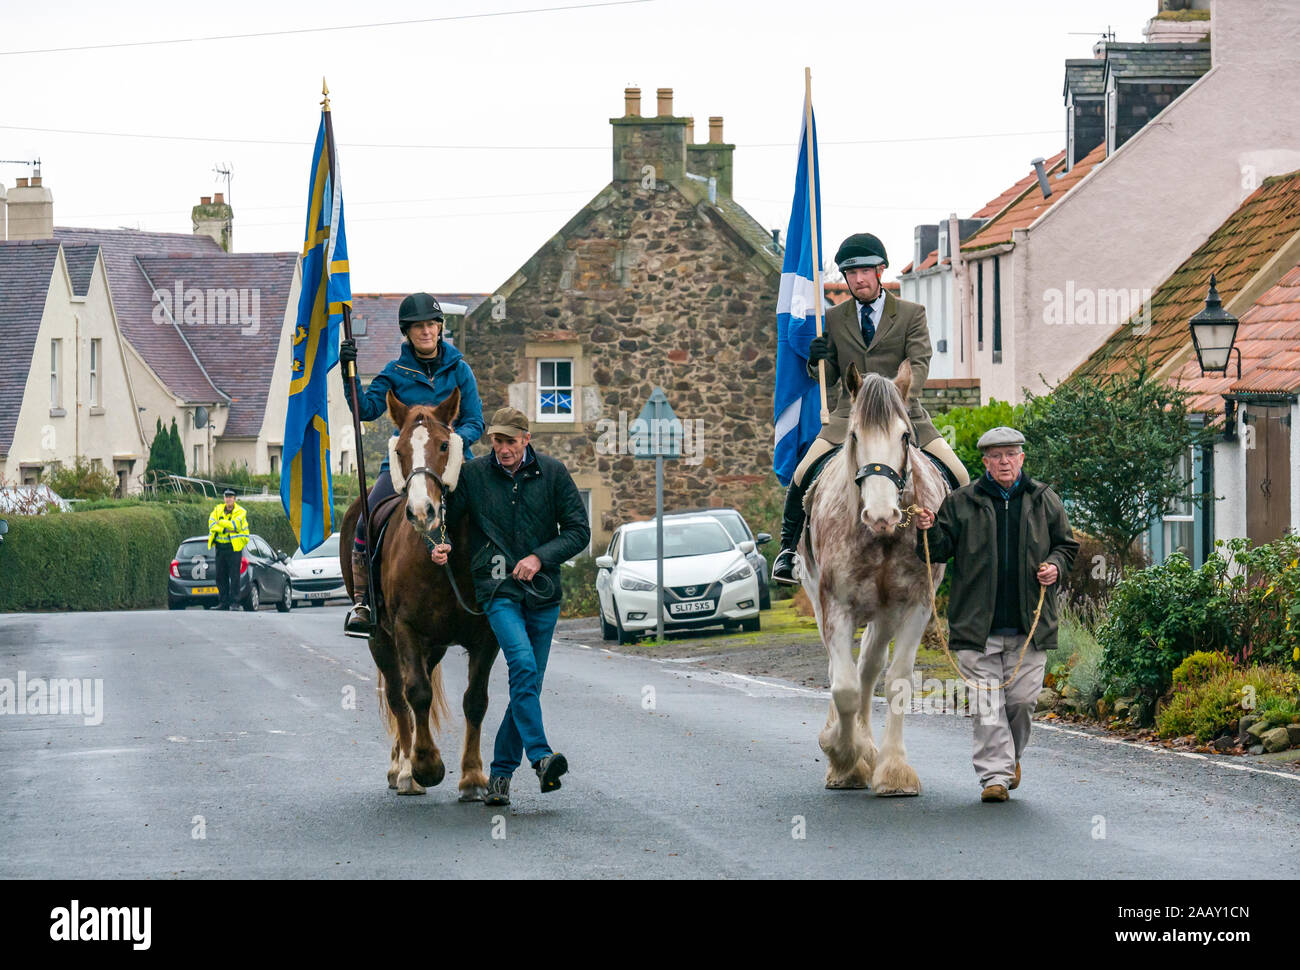 Athelstaneford, East Lothian, Scotland, UK. 24 November 2019. Saltire Festival: The first day of the annual festival to mark St Andrew’s Day takes place in the birthplace of the Scottish national flag where the saltire appeared in the sky as a good omen when the Picts & Scots defeated the Saxons led by Athelstan. Catherine Campbell on chestnut Irish Draft/Welsh Cob mare with groom Robert Campbell & Craig Donnelly on Strawberry Roan Clydesdale mare with groom/owner Arthur Greenan Stock Photo